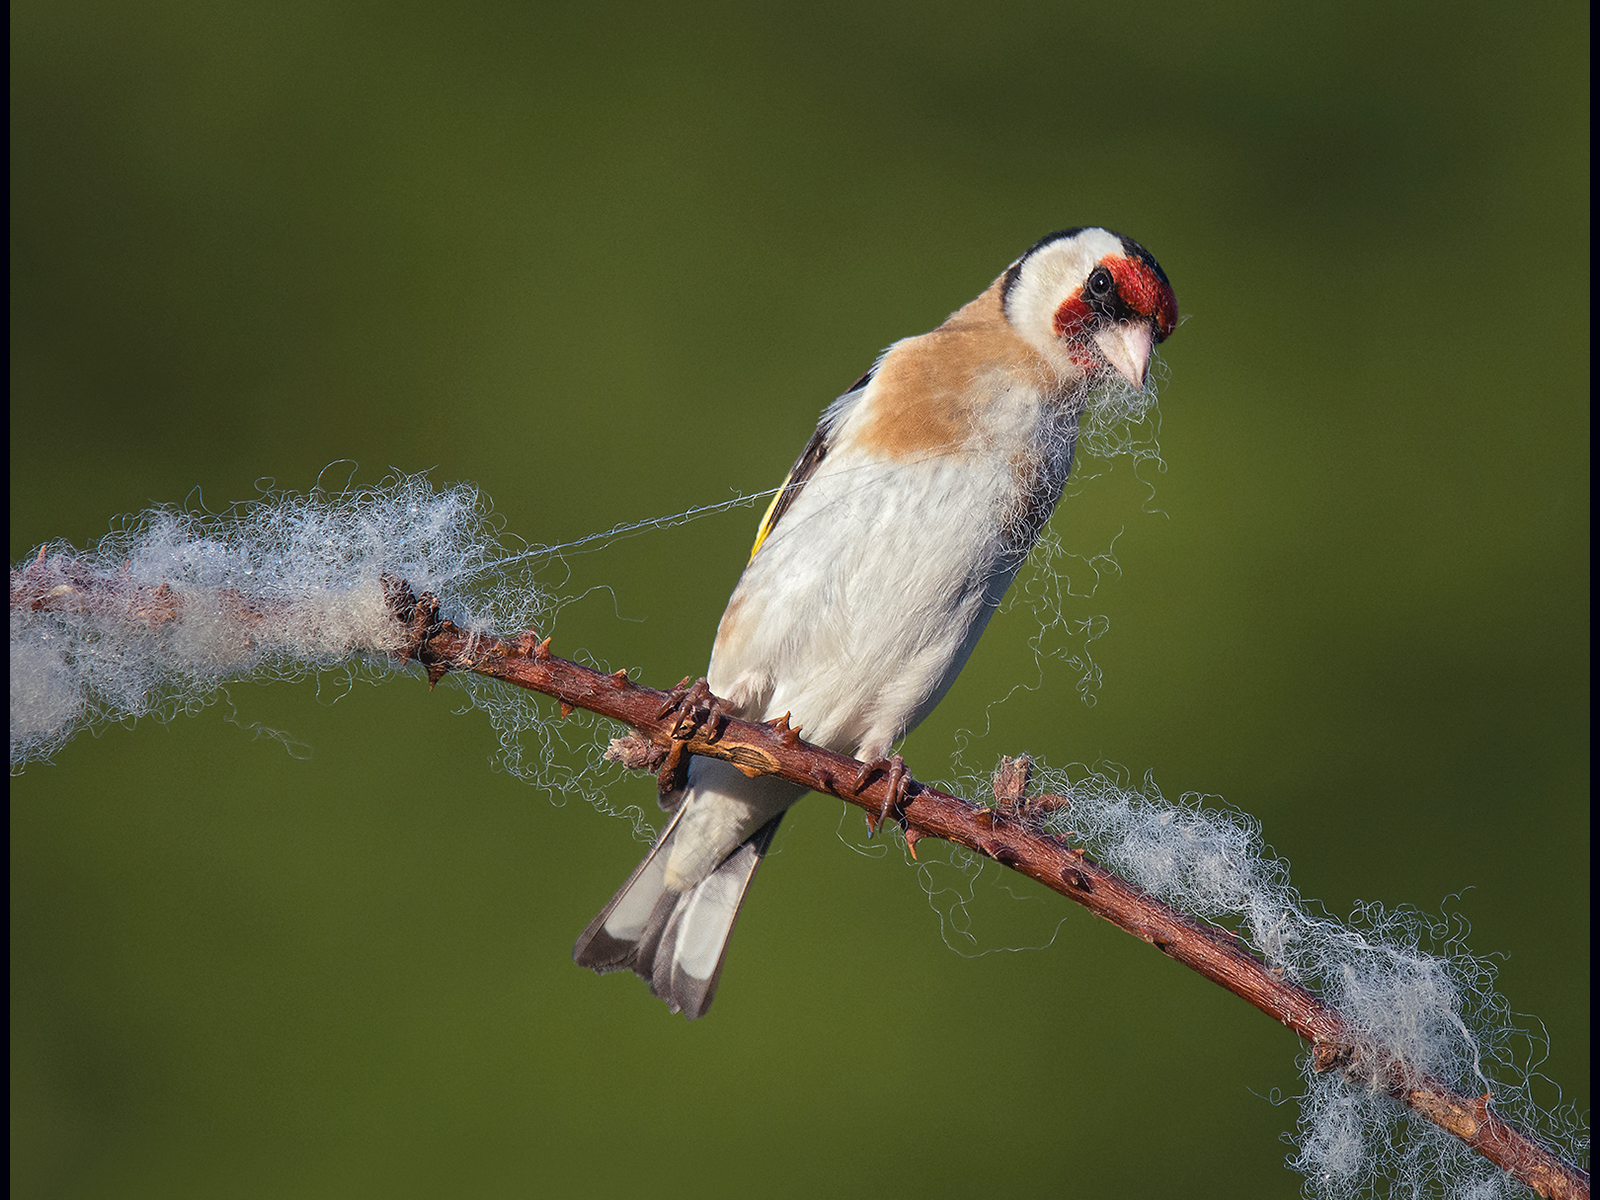 P0354688_Gill O Meara_Goldfinch collecting wool